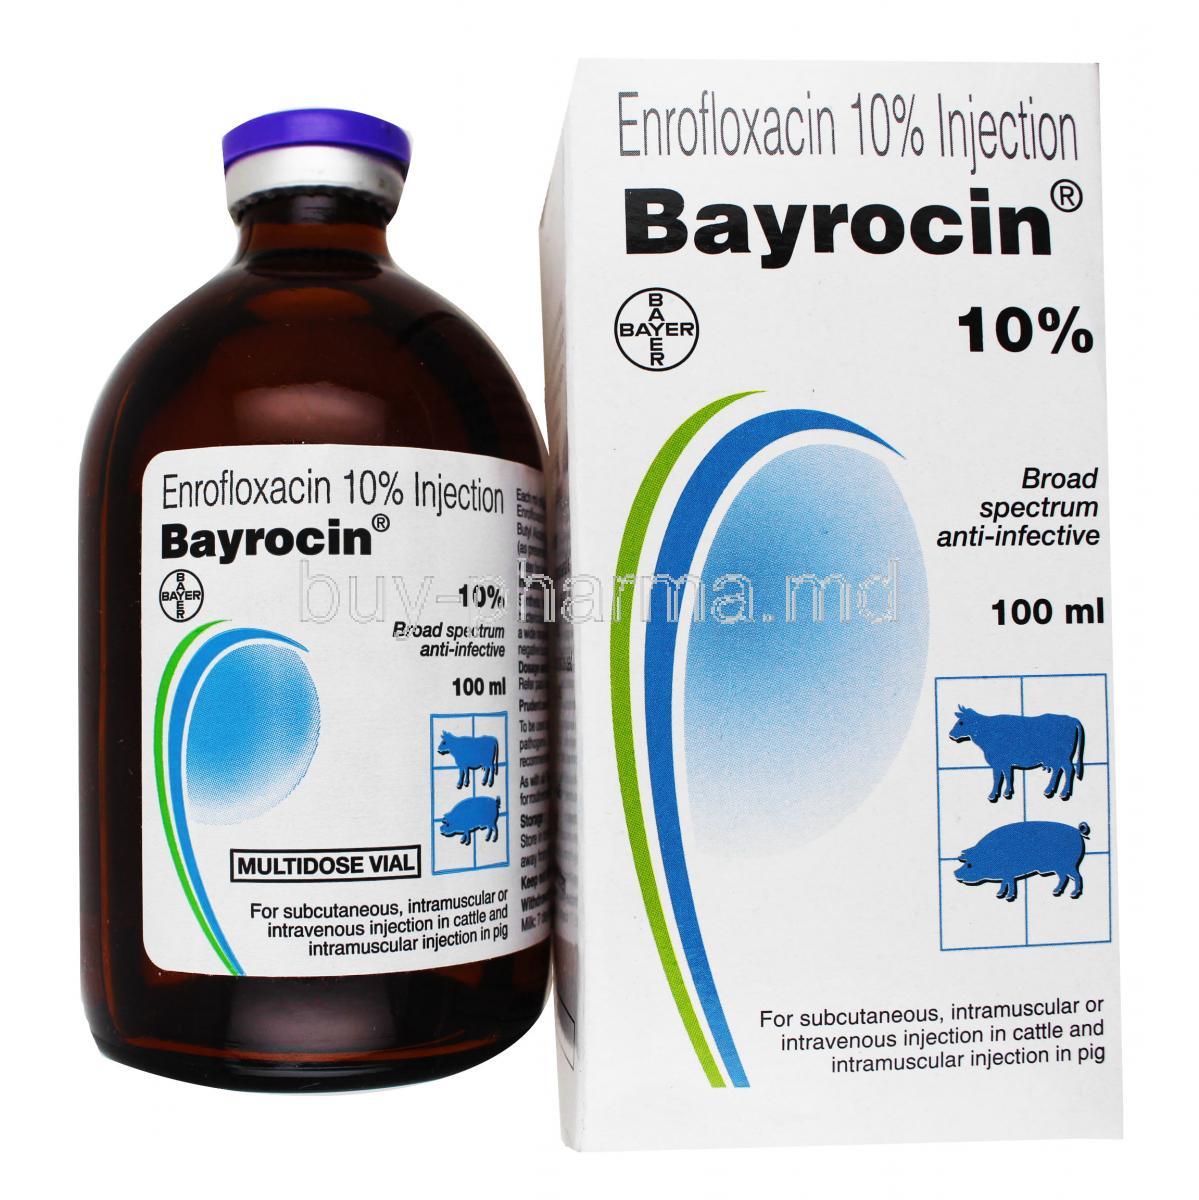 Bayrocin Injection for Cattles and Pigs box and vial